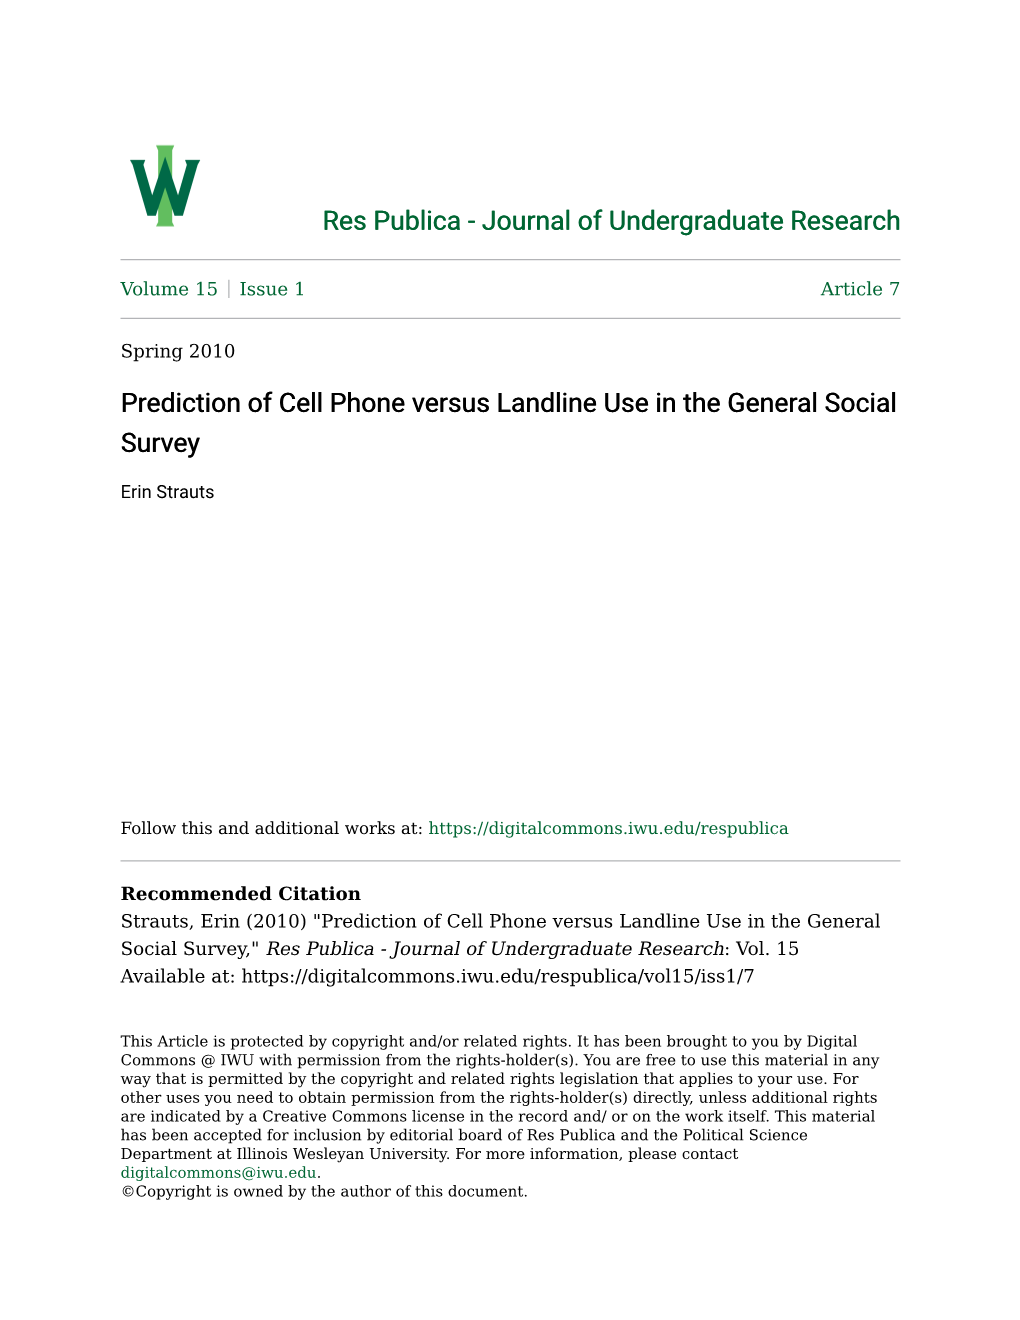 Prediction of Cell Phone Versus Landline Use in the General Social Survey